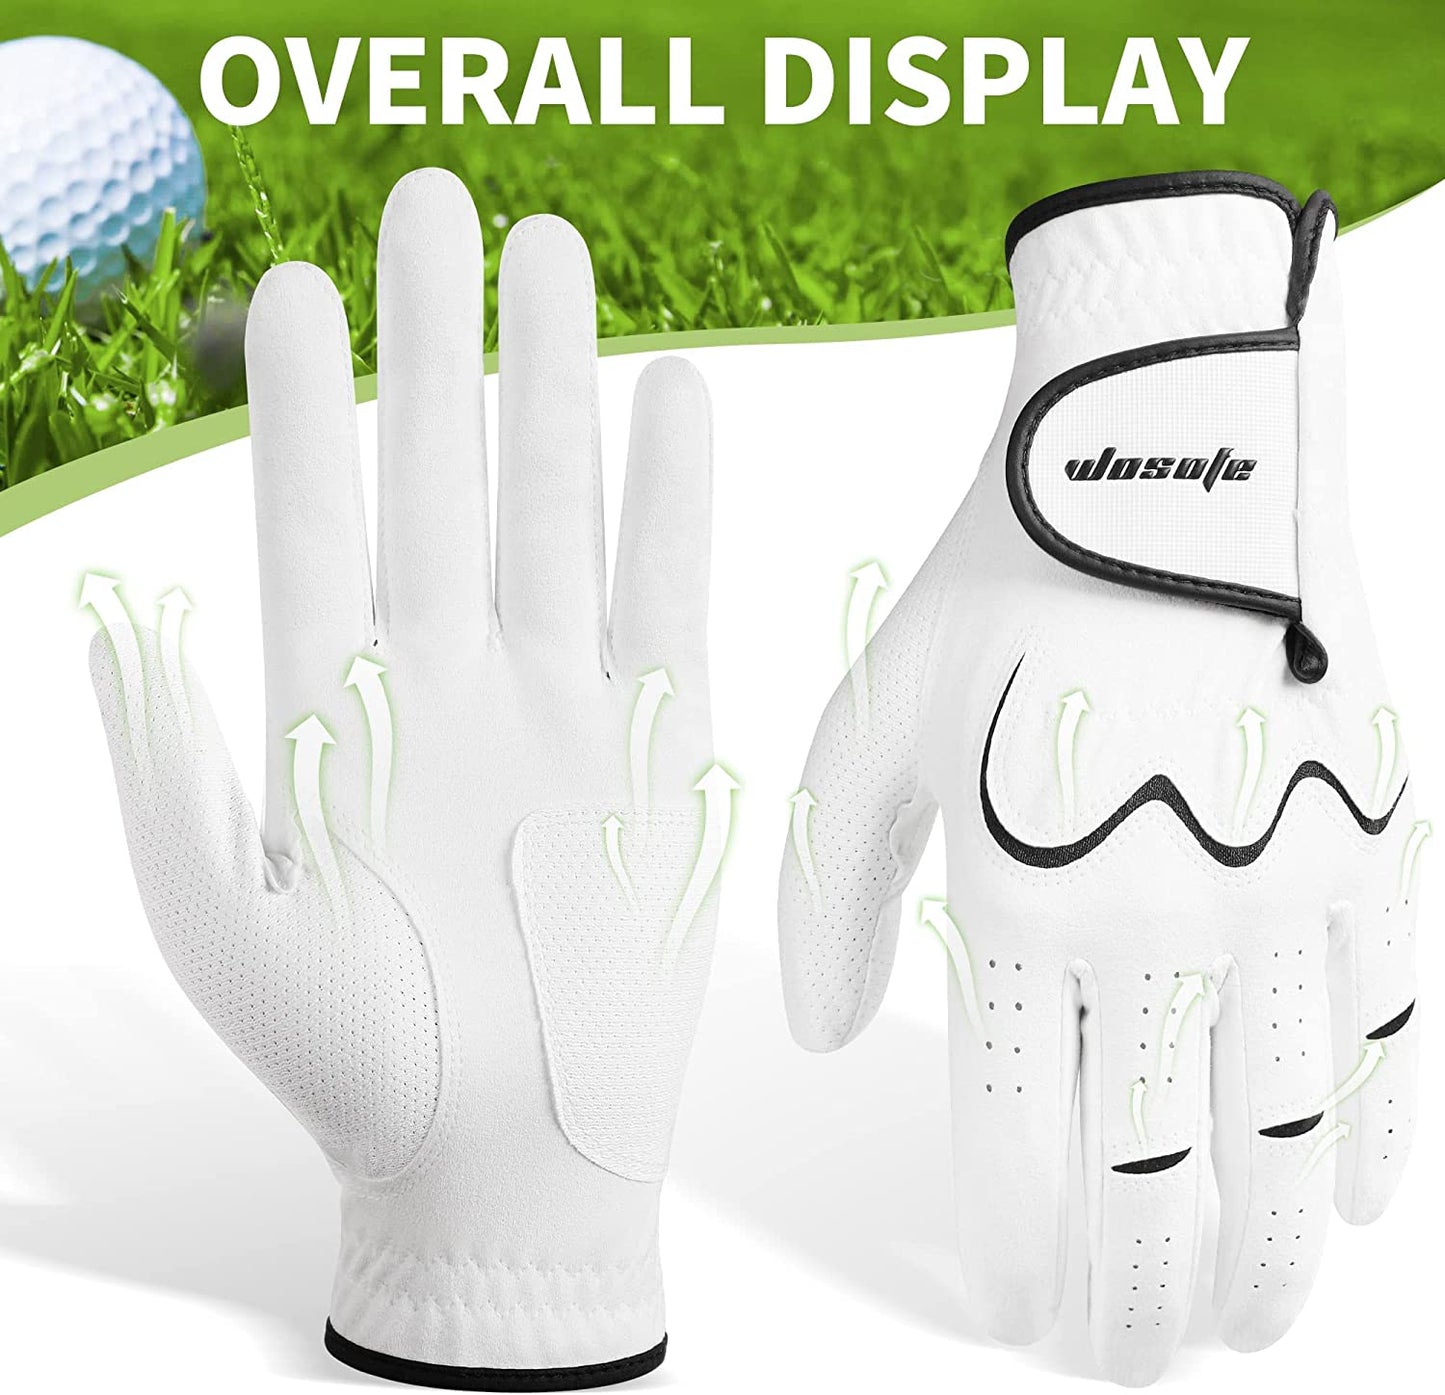 wosofe Men’s Golf Glove Left Hand Non-Slip Breathable Lycra Nanocloth Soft Comfortable No Sweat All Weather Liner and Green Fork